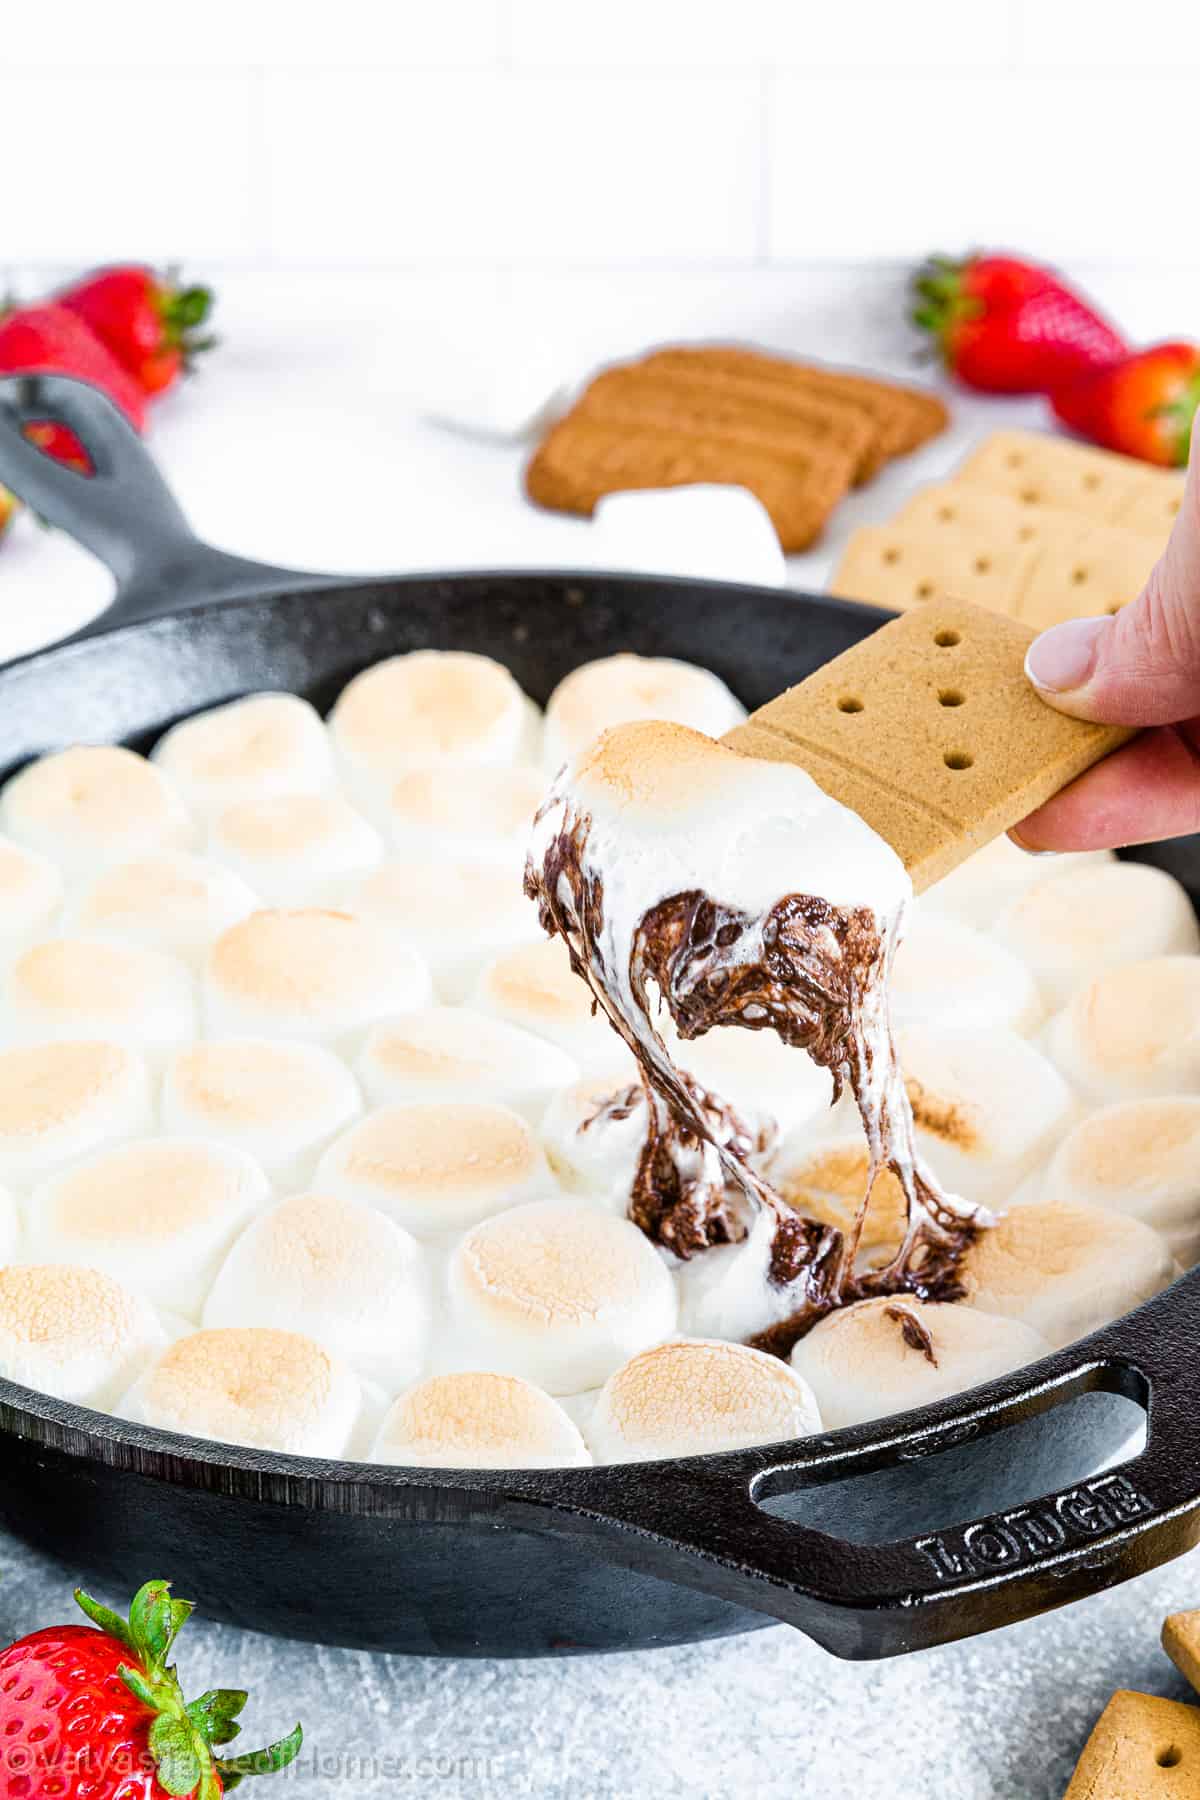 S'mores dip is a delectable delicacy that captures the essence of traditional s'mores in a melted and dippable form.